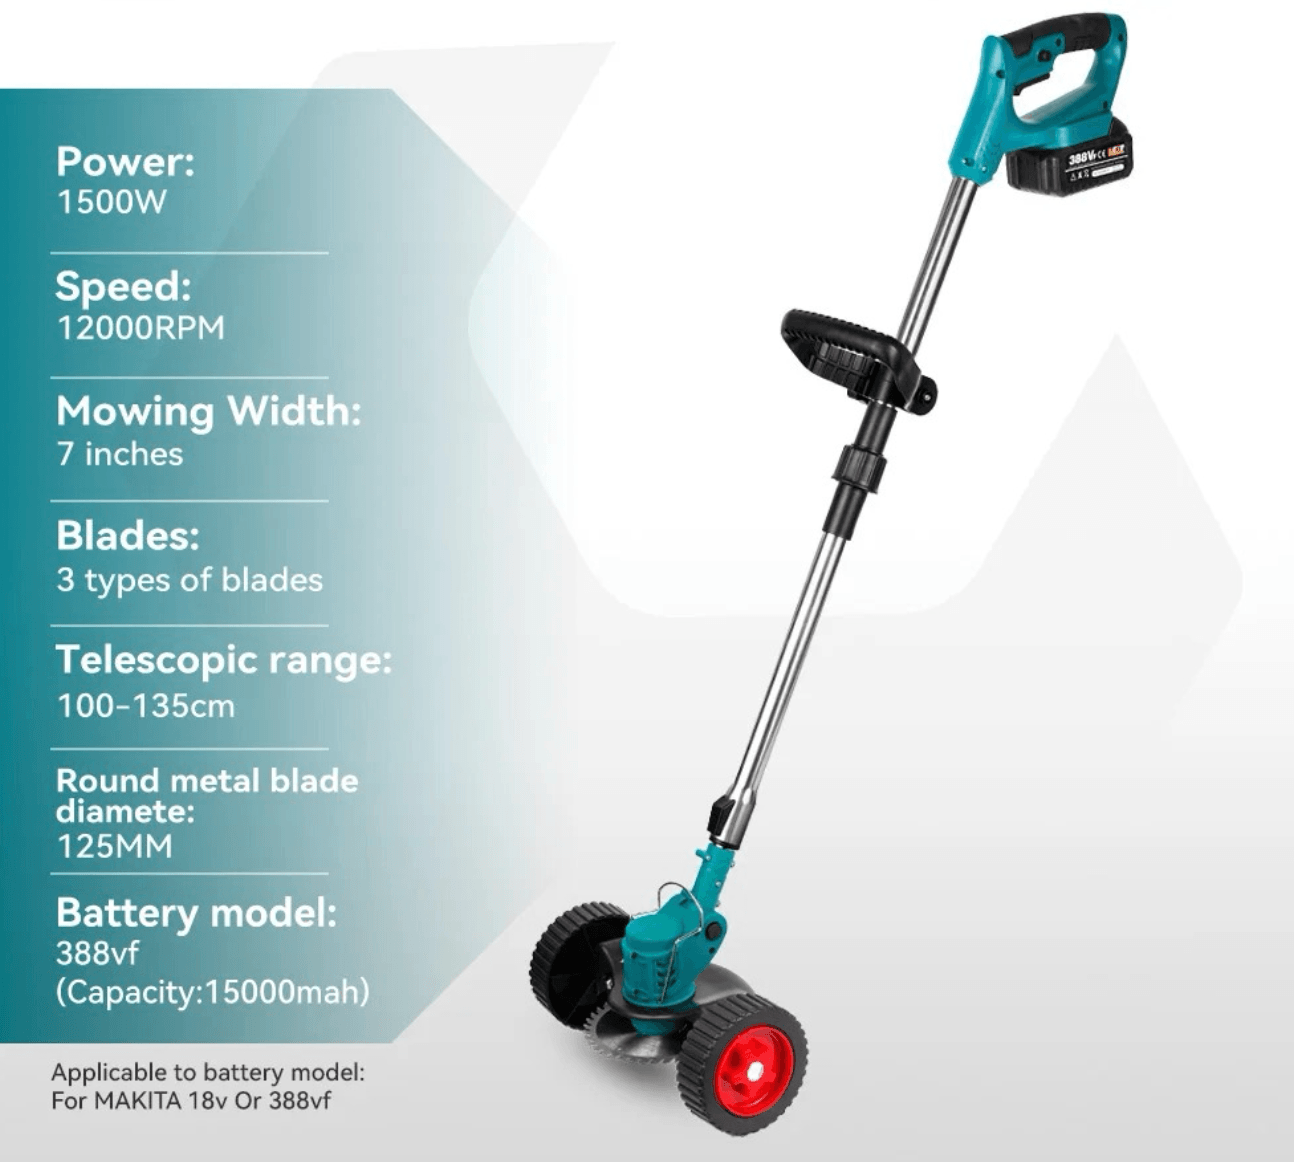 Cordless Weed Trimmer with Wheels